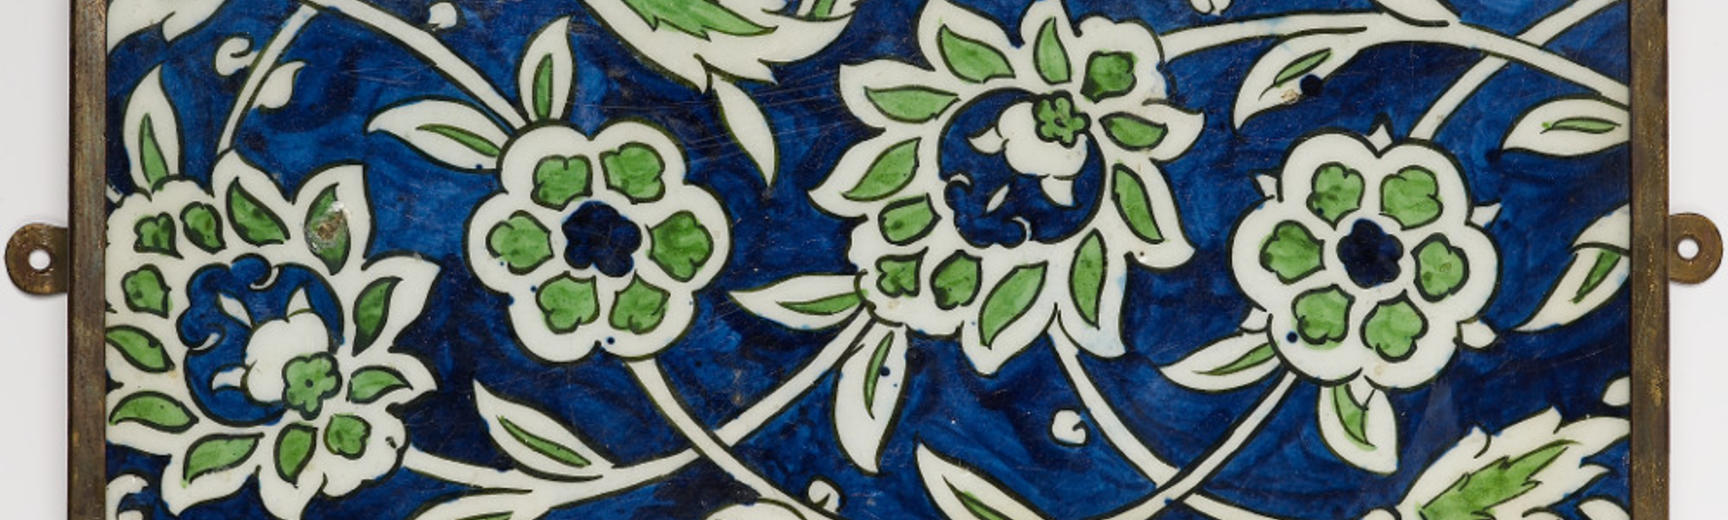 A blue tile patterned with a green flowers.